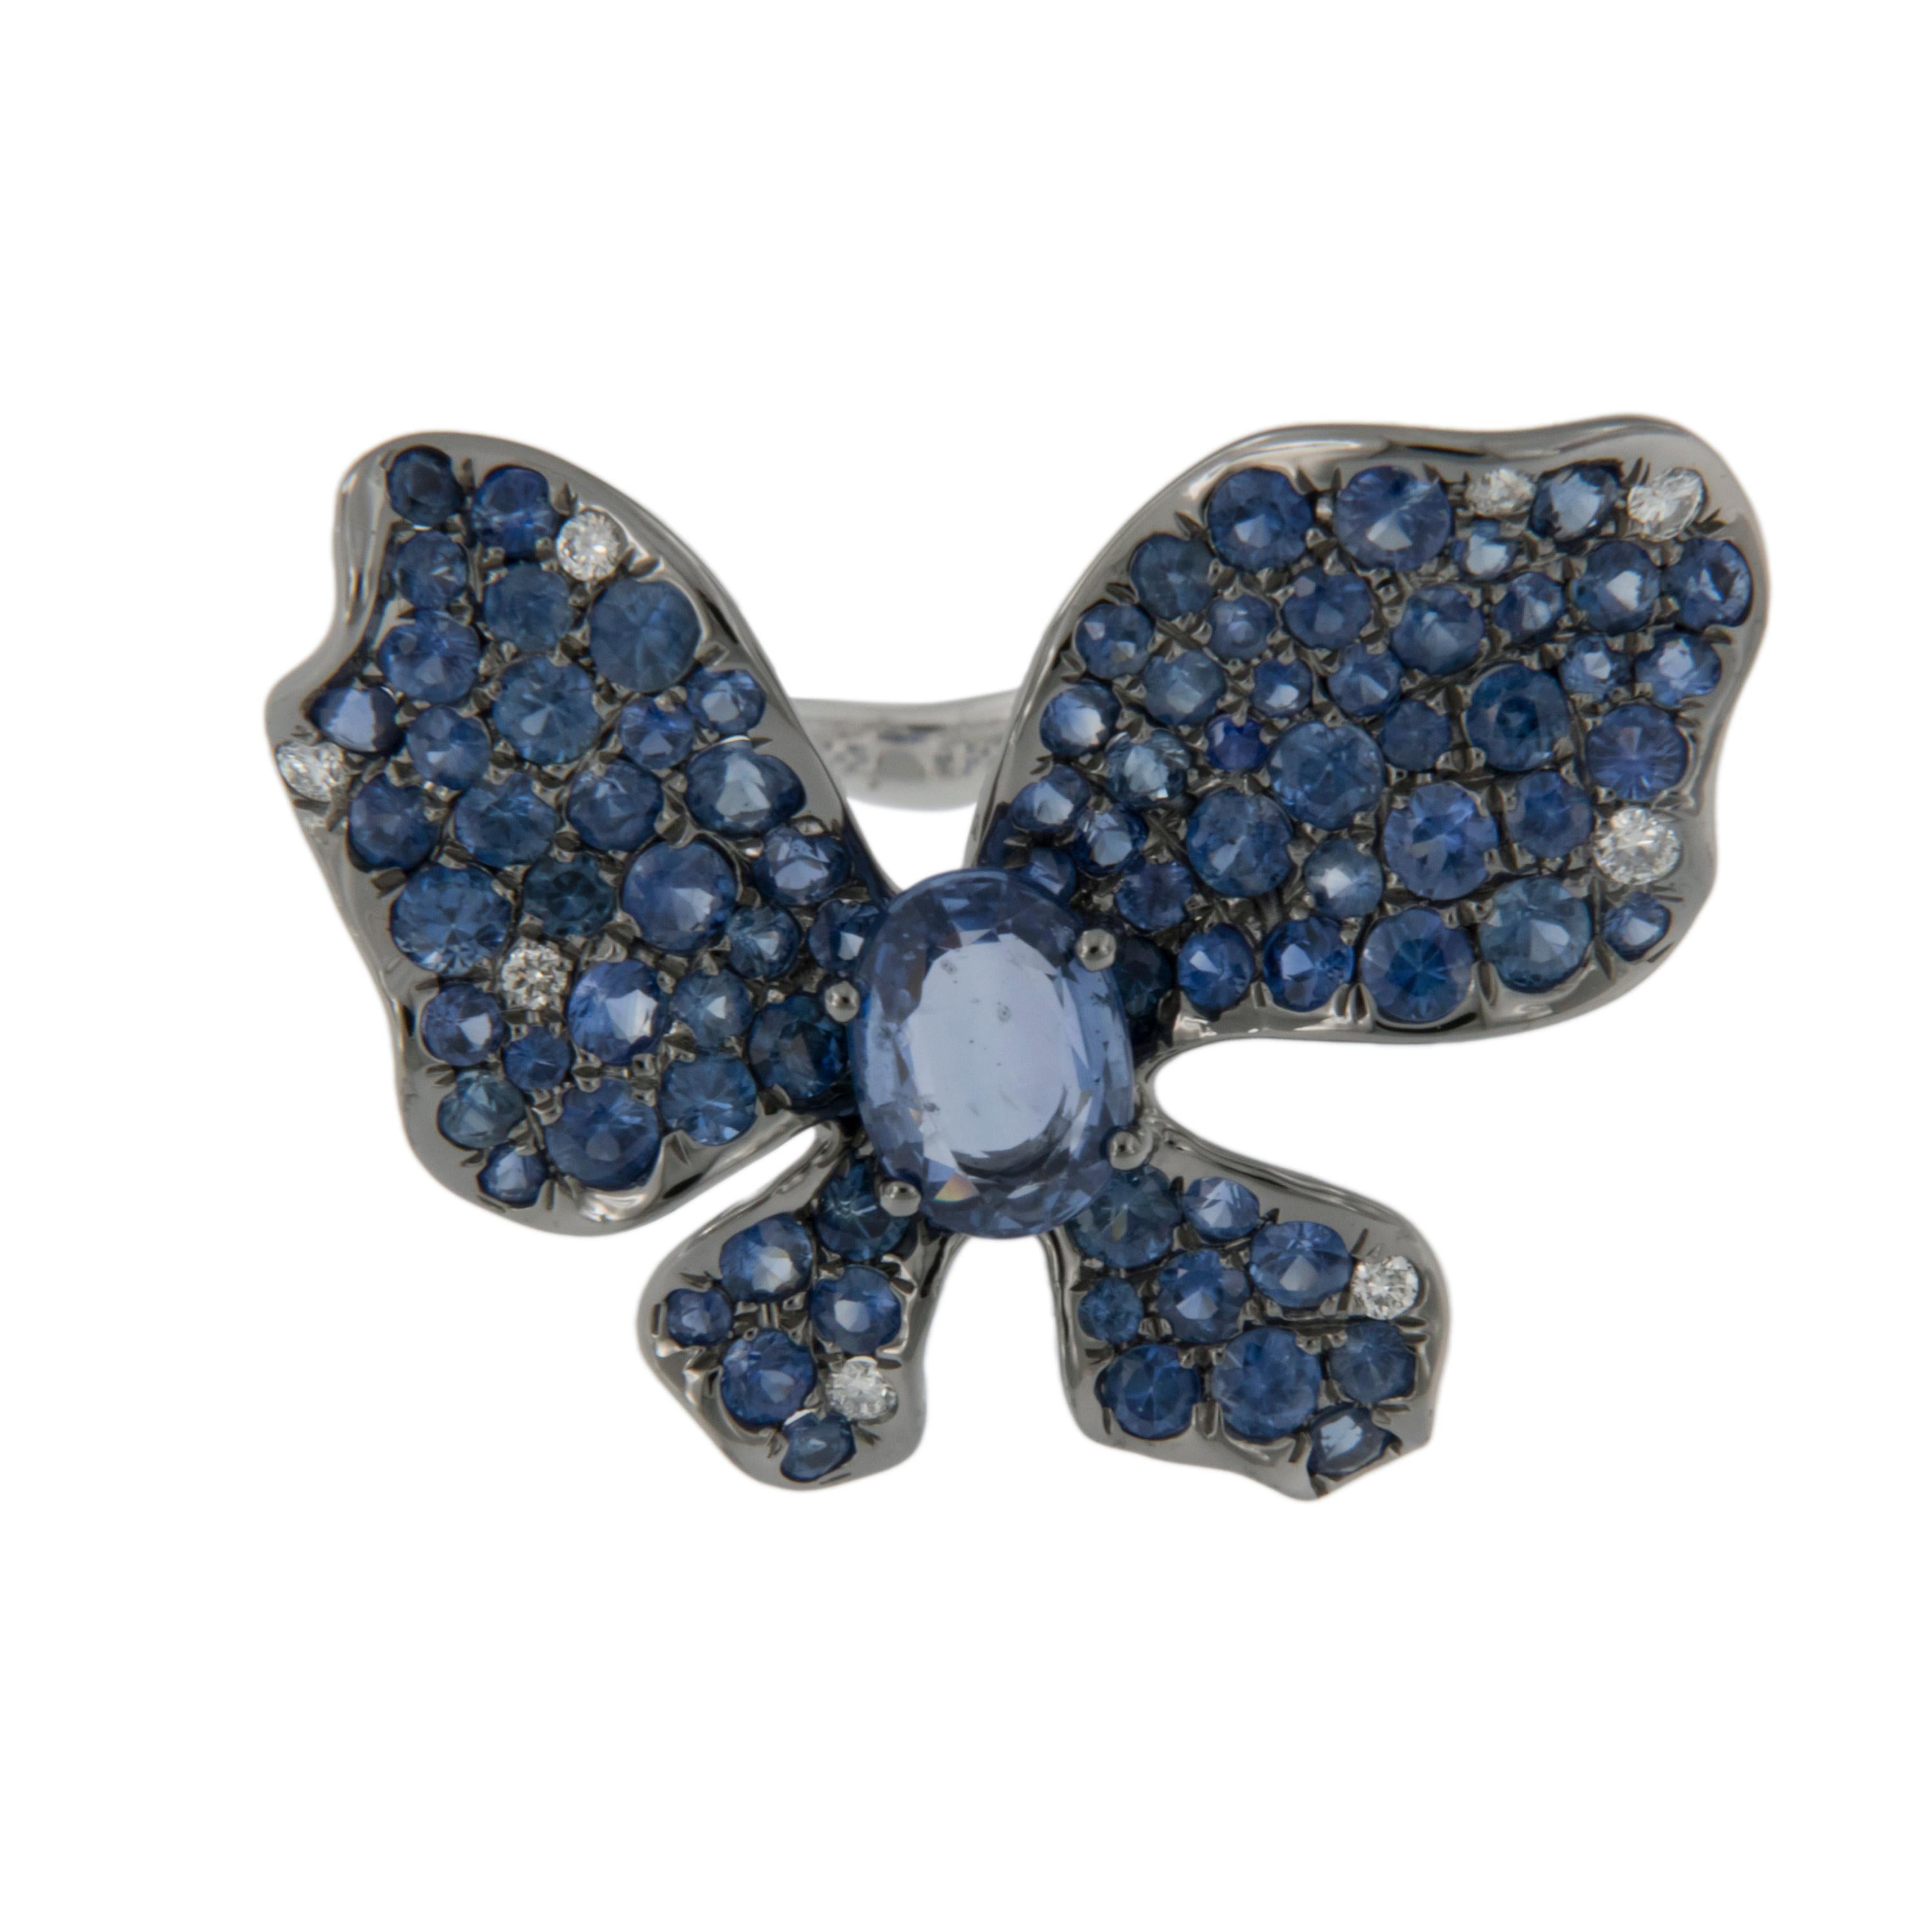 This fluid and whimsical ring is simply elegant! With 1.86 Cttw various tones of fine blue sapphires accented by 0.04 Cttw white diamonds, you will be elated wearing it. Ring is a size 6.75, but can be size to fit most. Complimentary signature